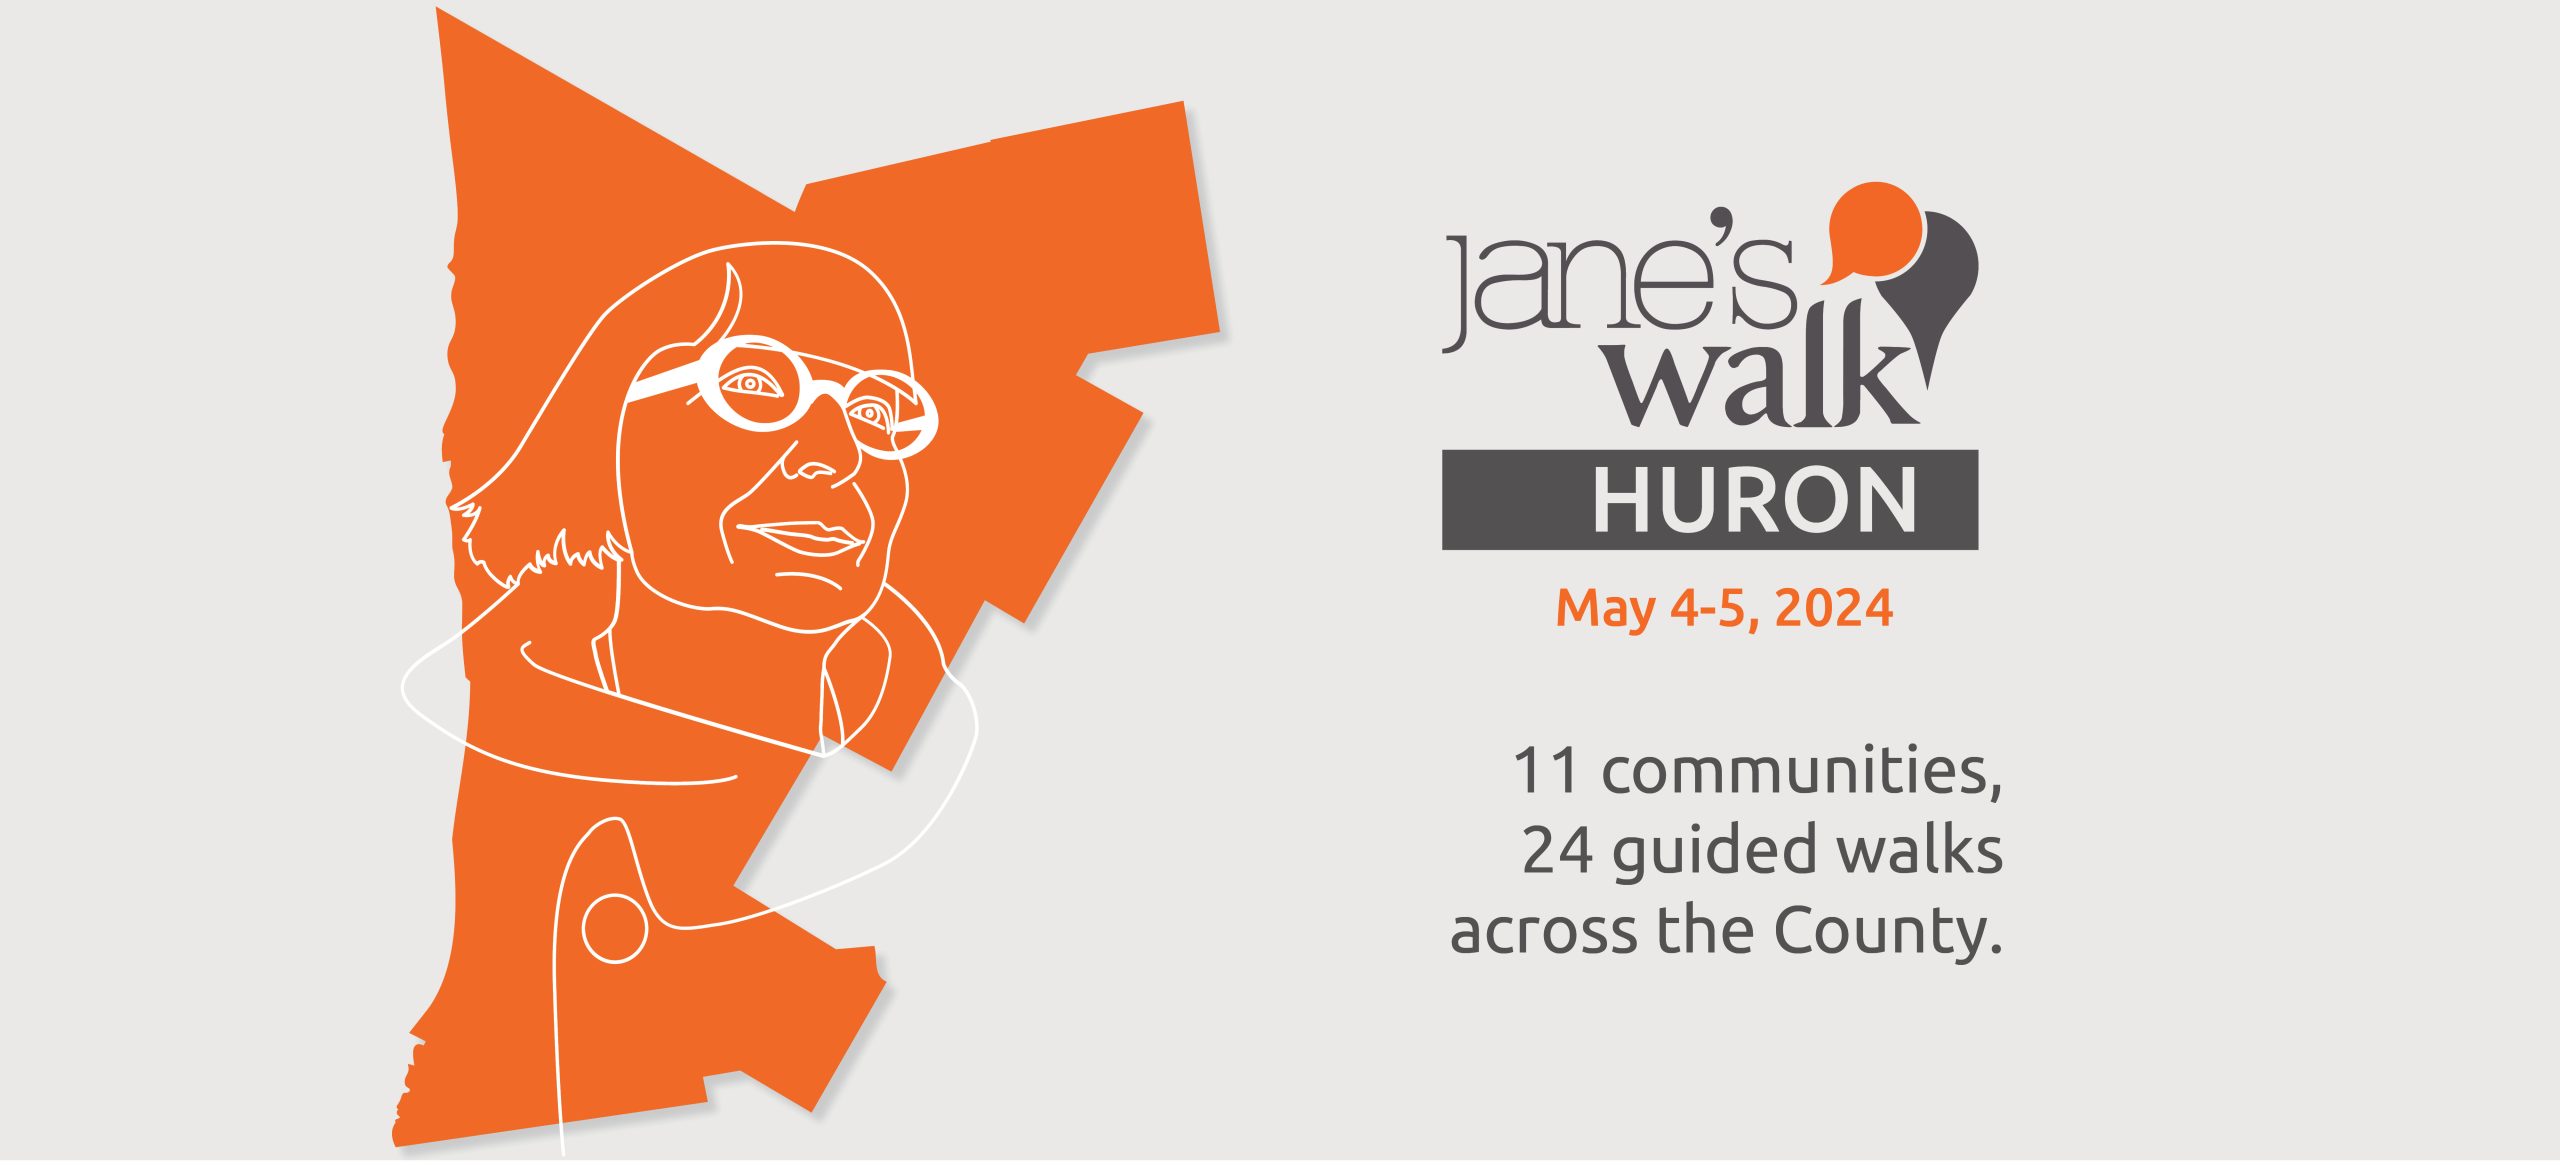 Illustration of Jane Jacobs over outline of Huron County with text promoting Jane's Walk Huron 2024